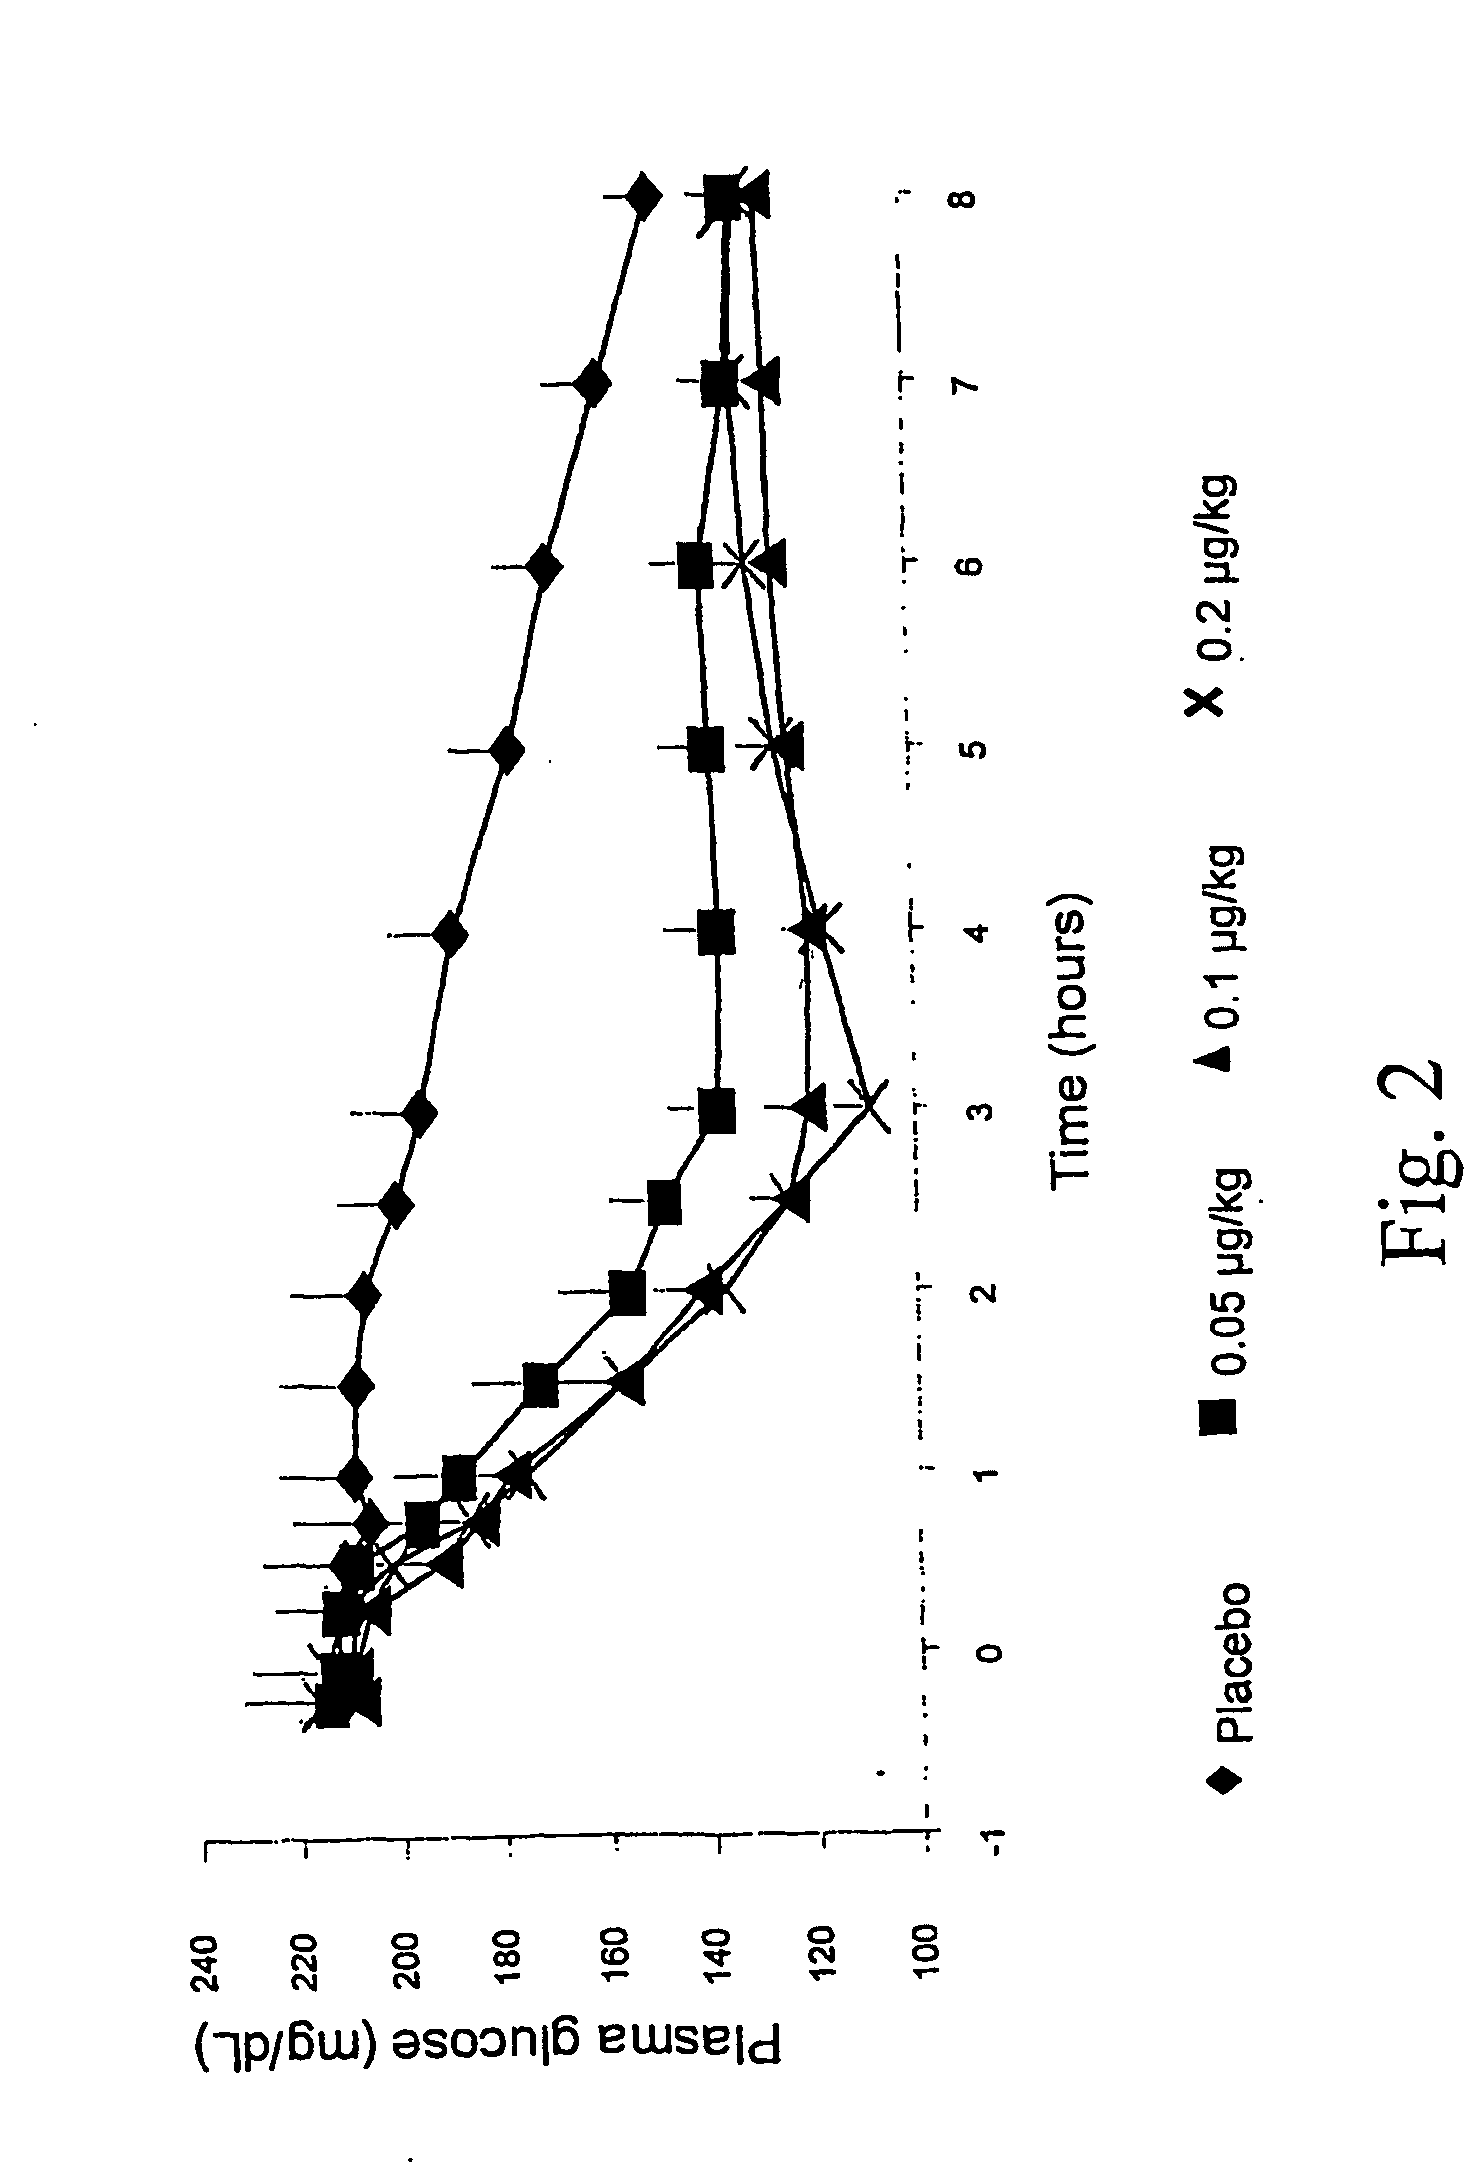 Novel exendin agonist formulations and methods of administration thereof